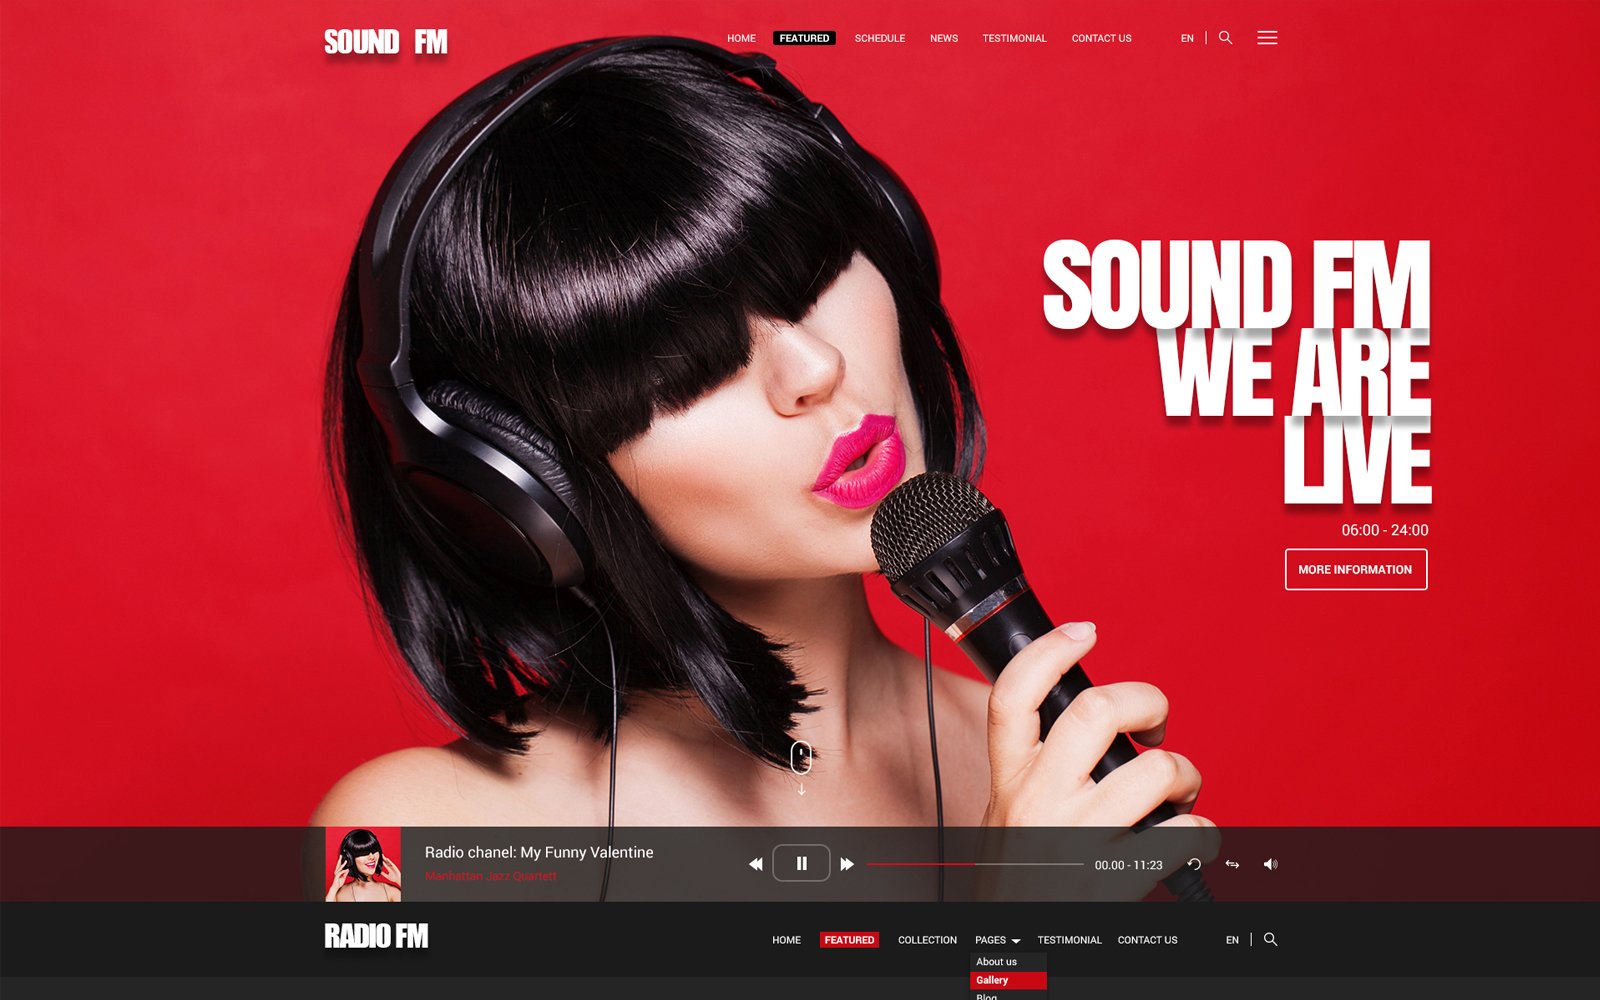 Radio-FM - Website Template - Red and Black Theme